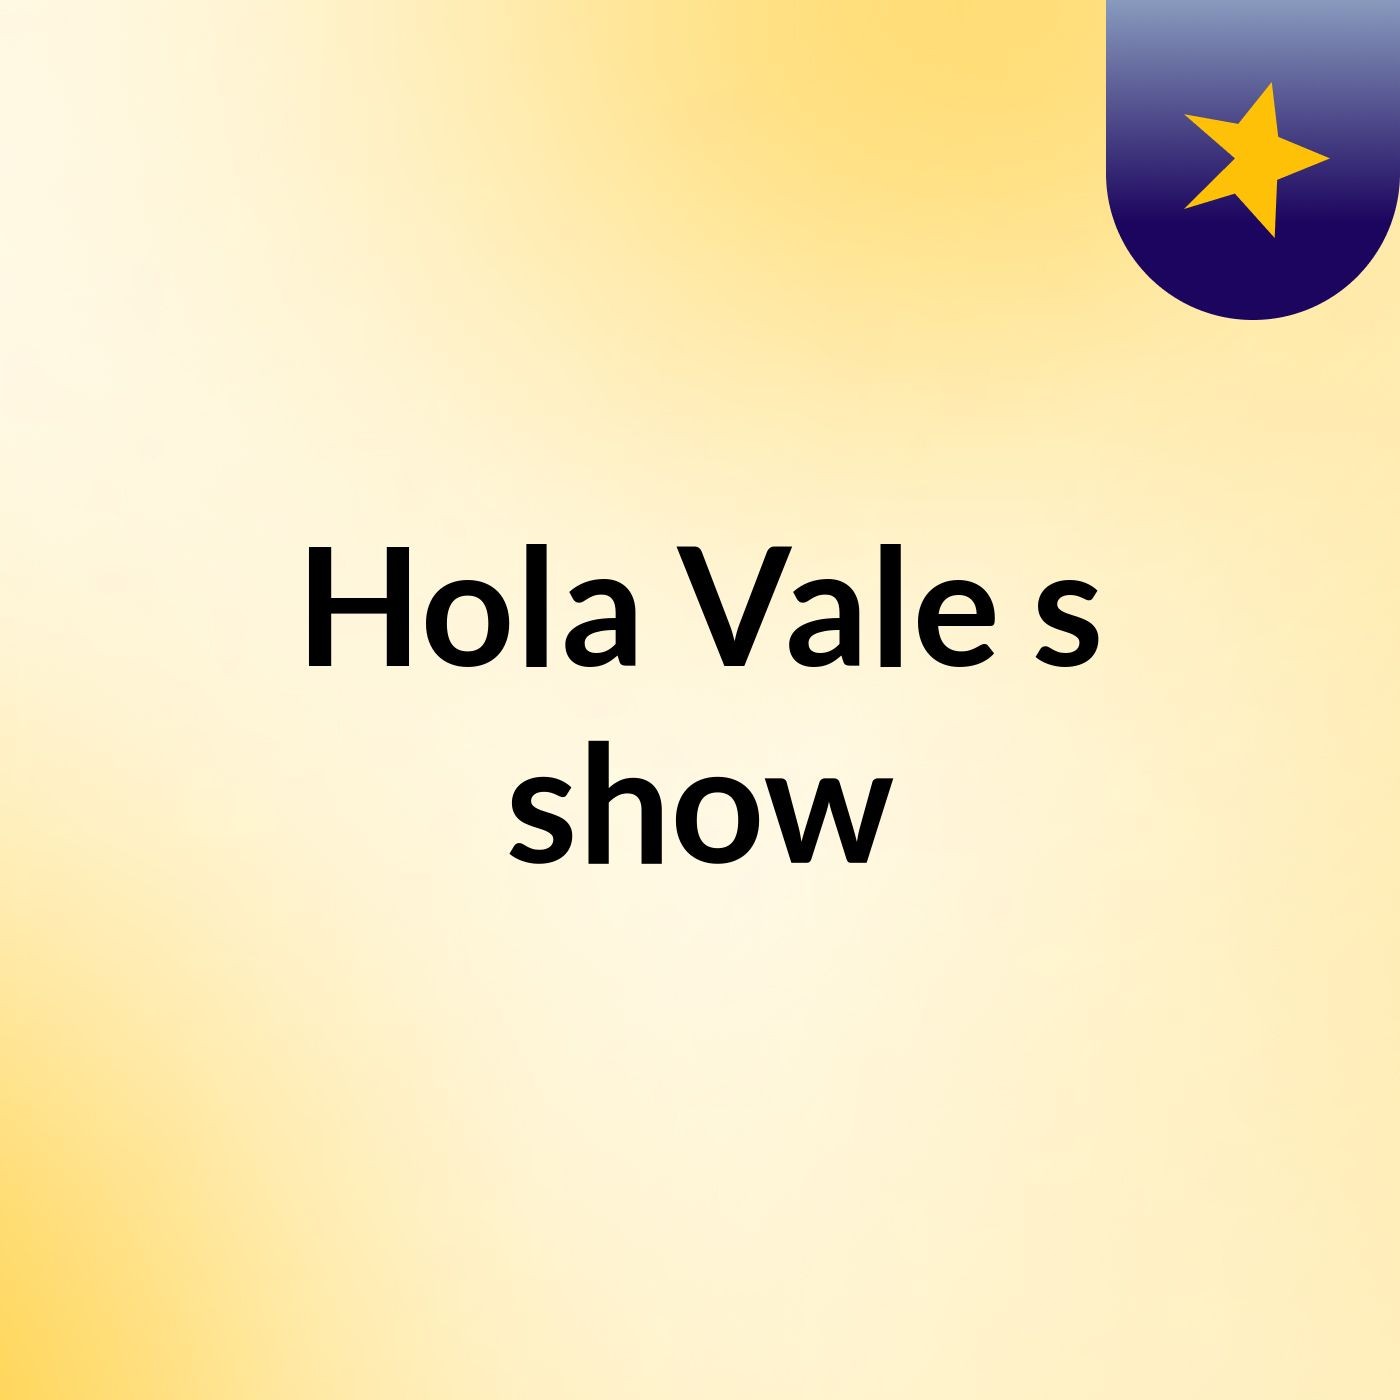 Hola Vale's show